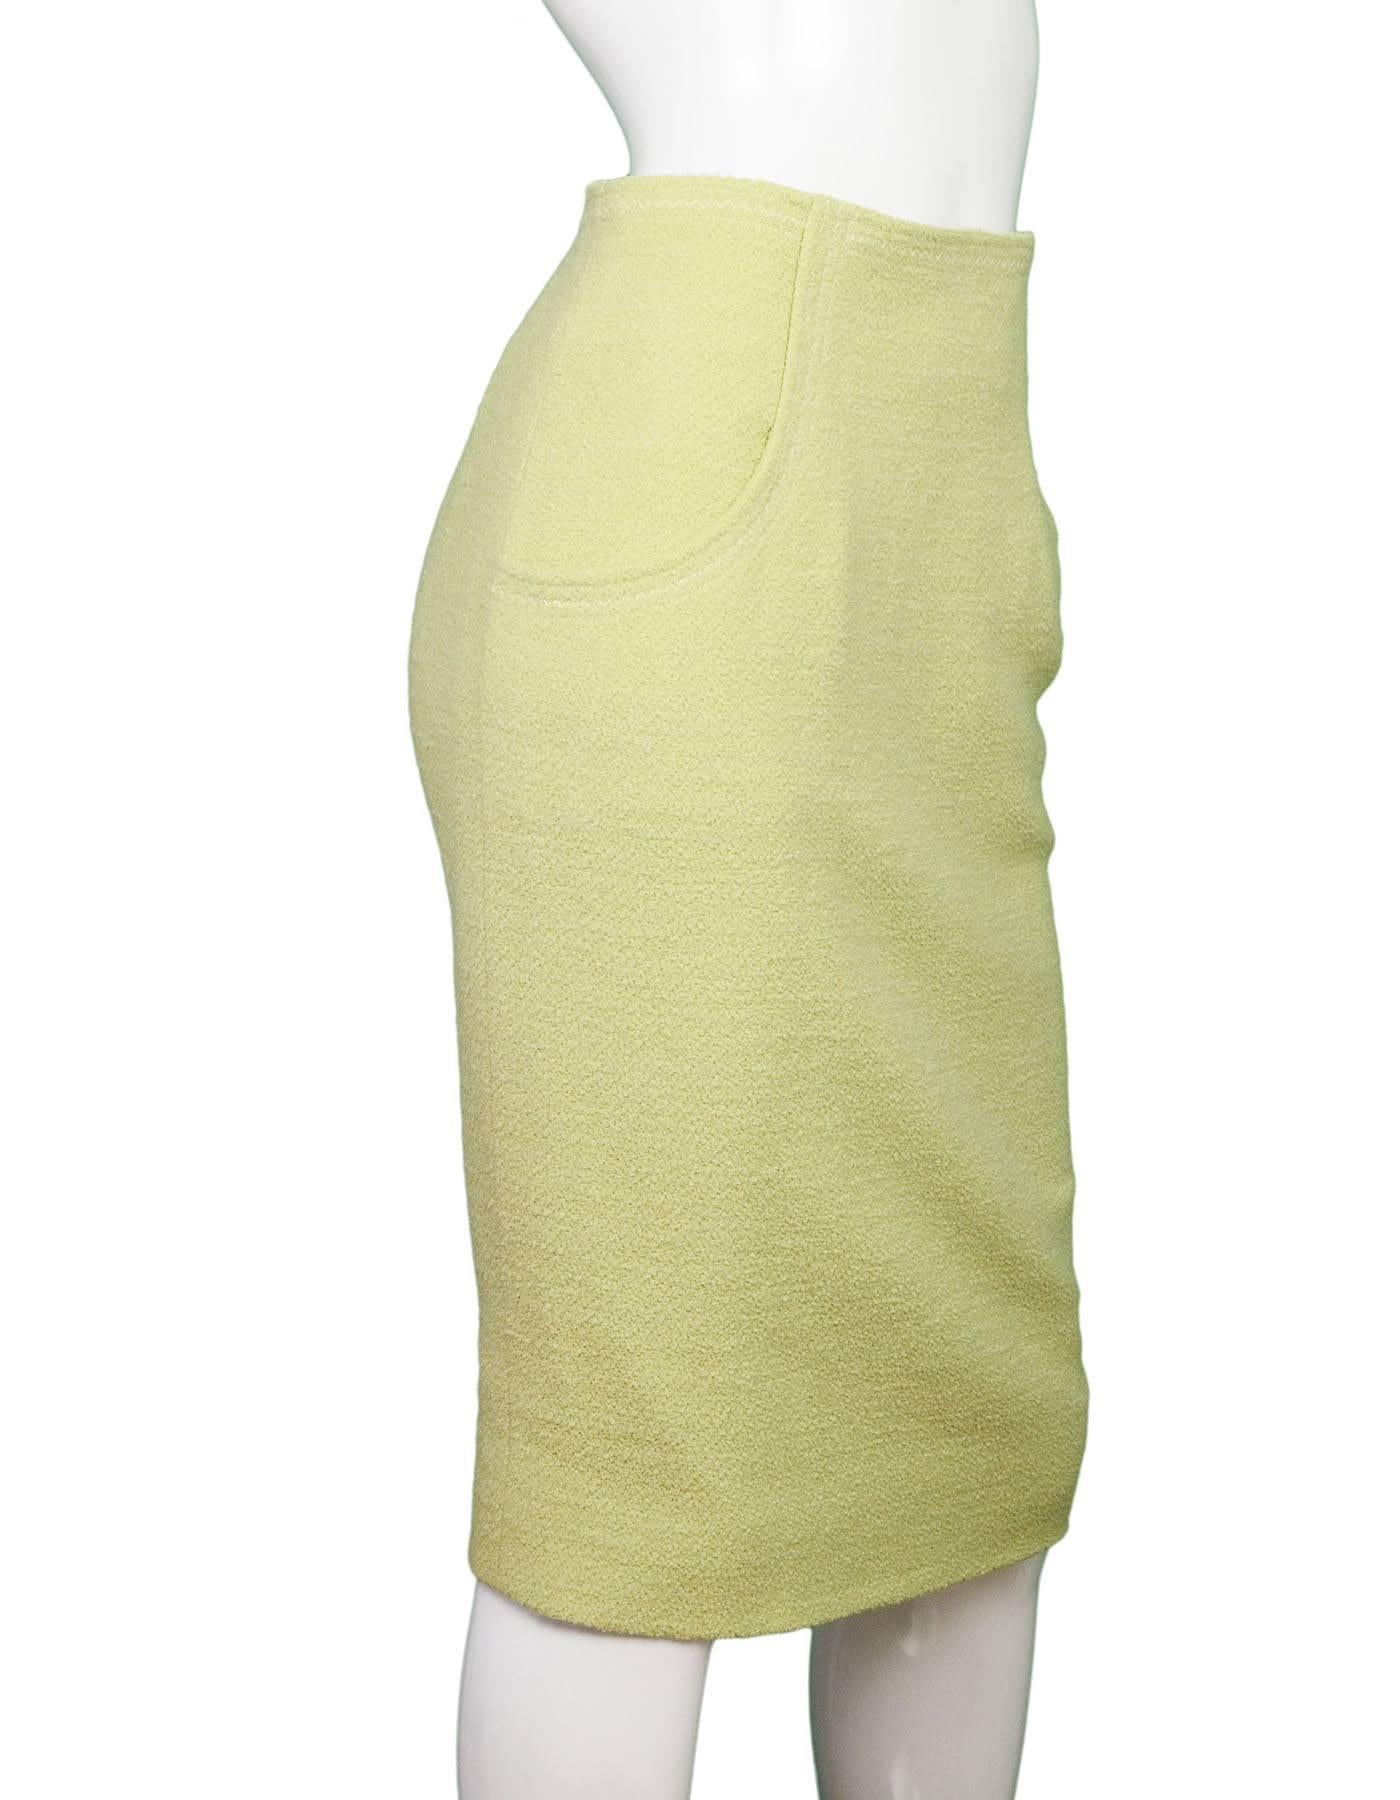 chartreuse pencil skirt